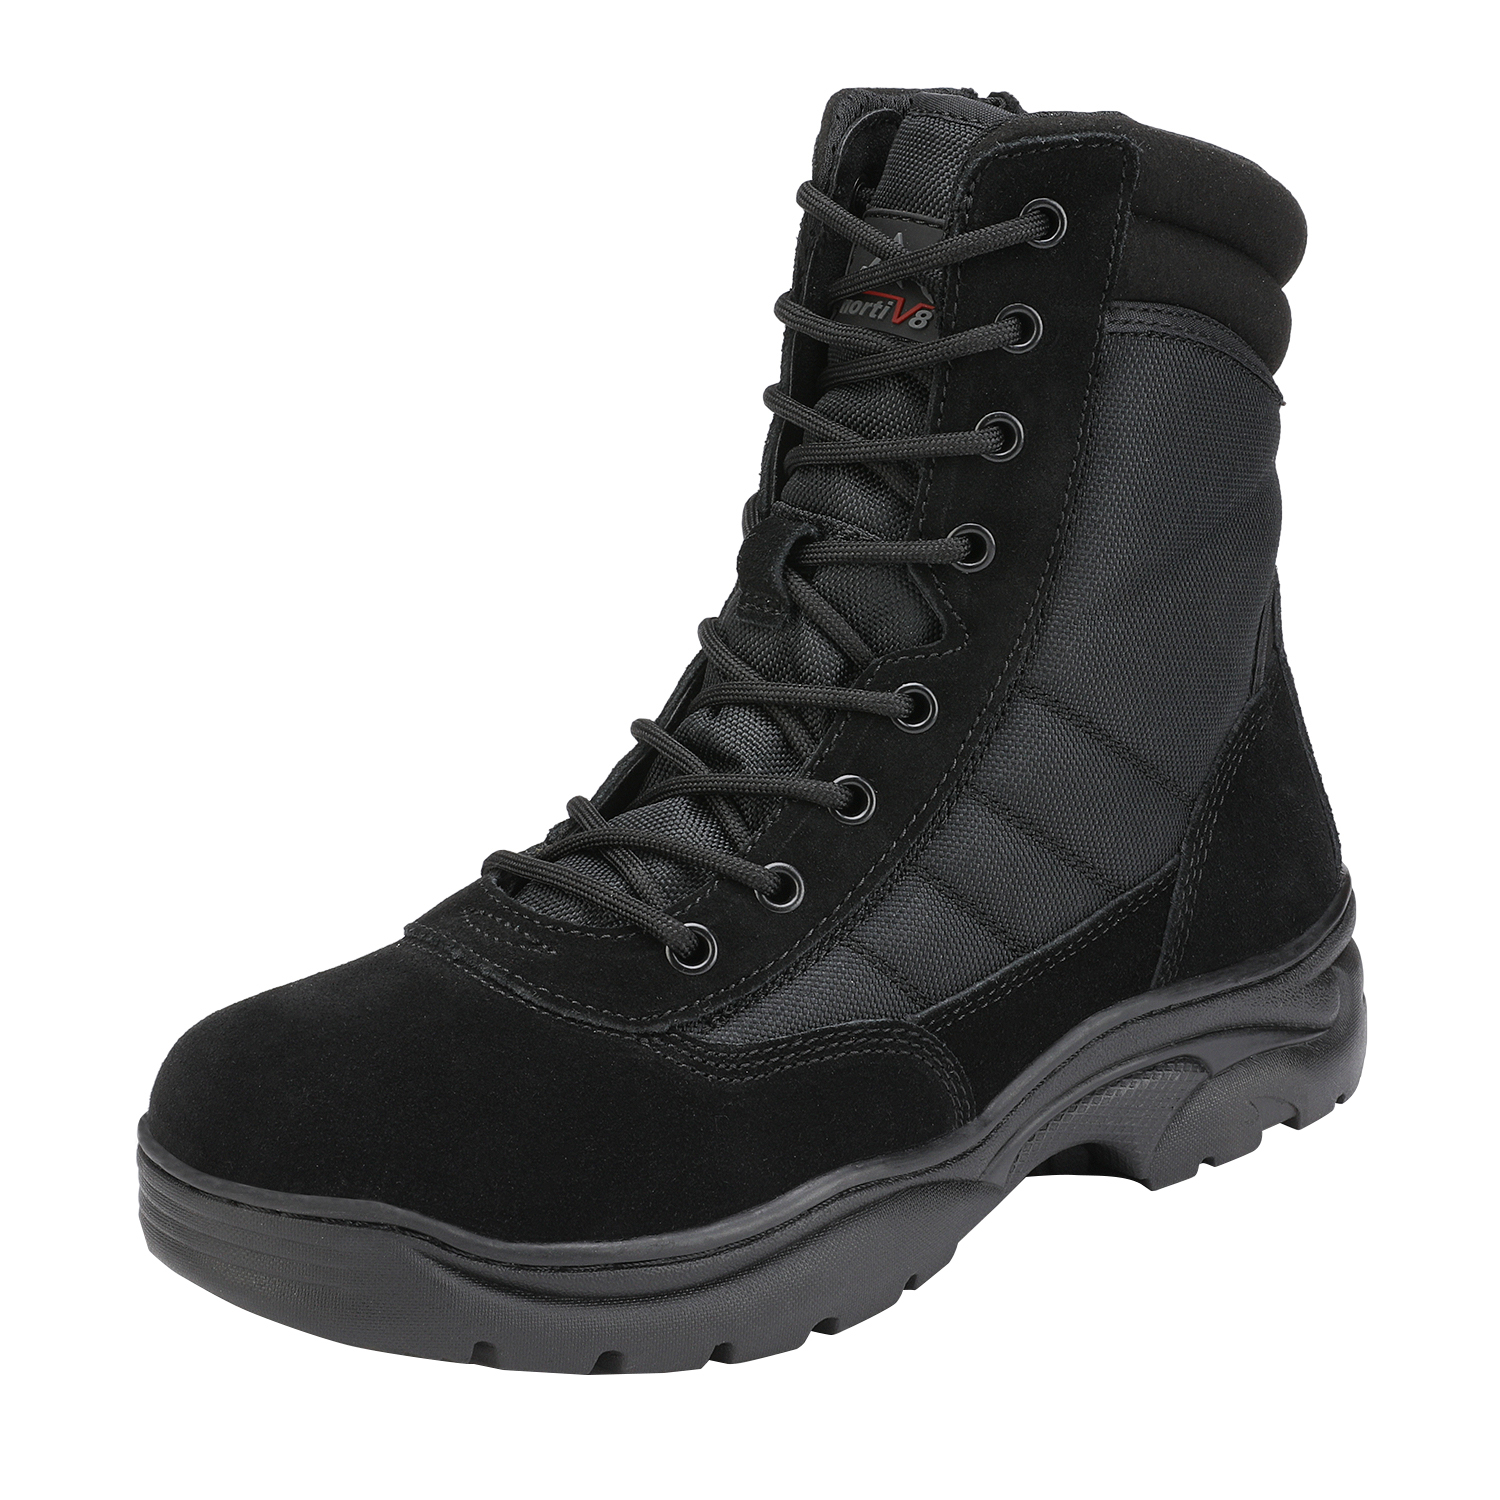 Nortiv 8 Men's Tactical Work Boots Zip Military Leather Motorcycle Combat Boots for Man Trooper Black/Suede Size 8 - image 1 of 6